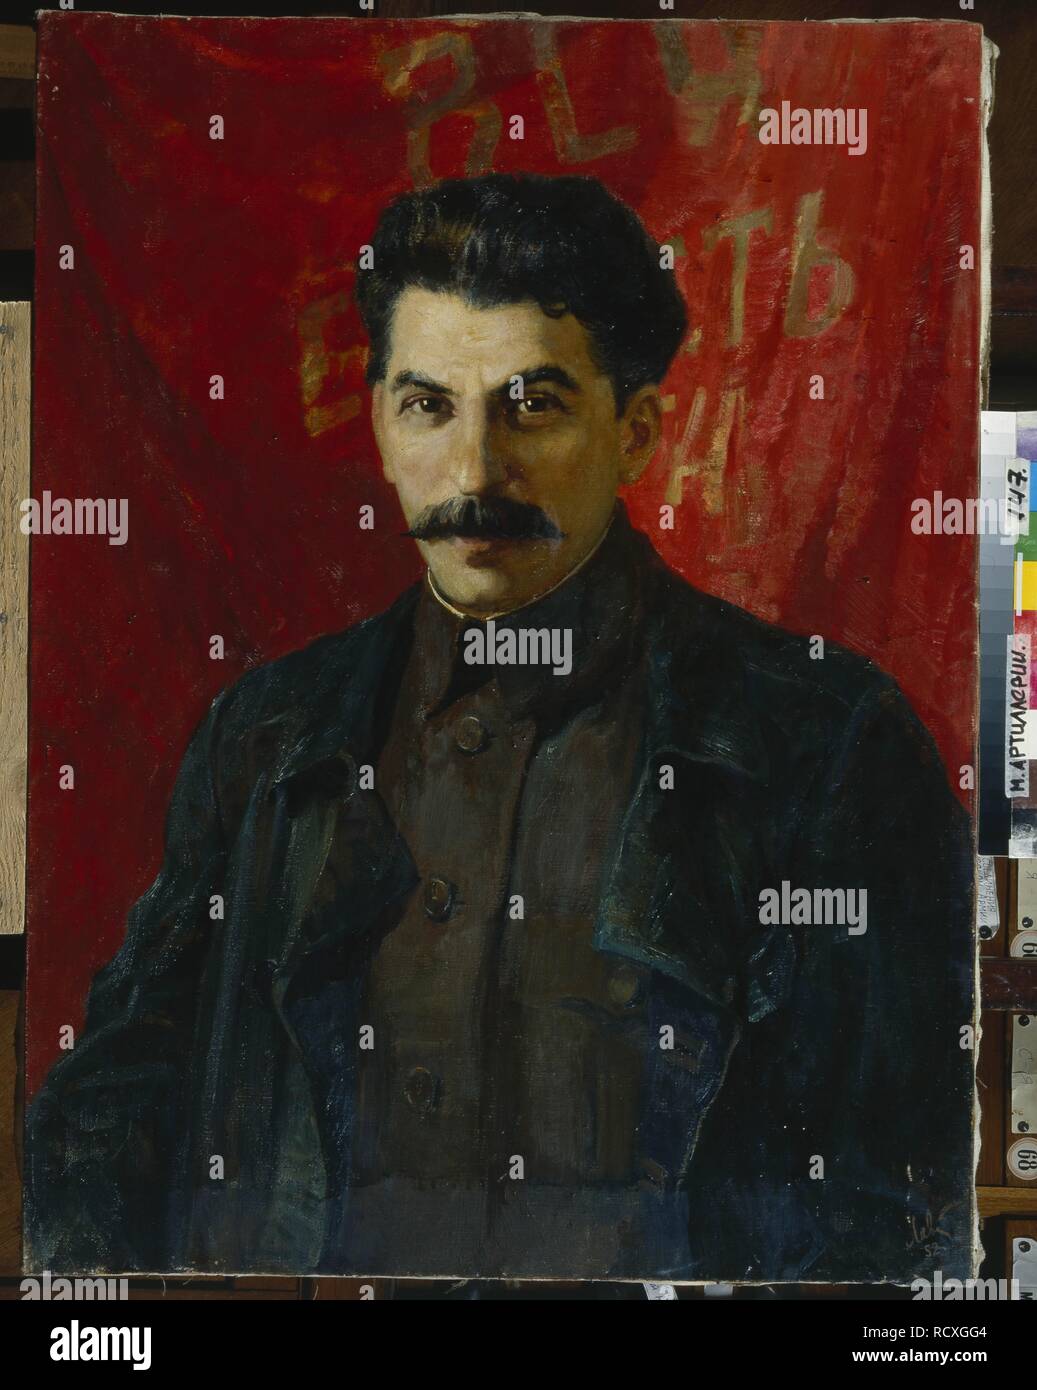 Portrait of Stalin before the red banner with the inscription 'All Power to the Soviets!'. Museum: State Central Artillery Museum, St. Petersburg. Author: Levitin, Anatoli Pavlovich. Stock Photo